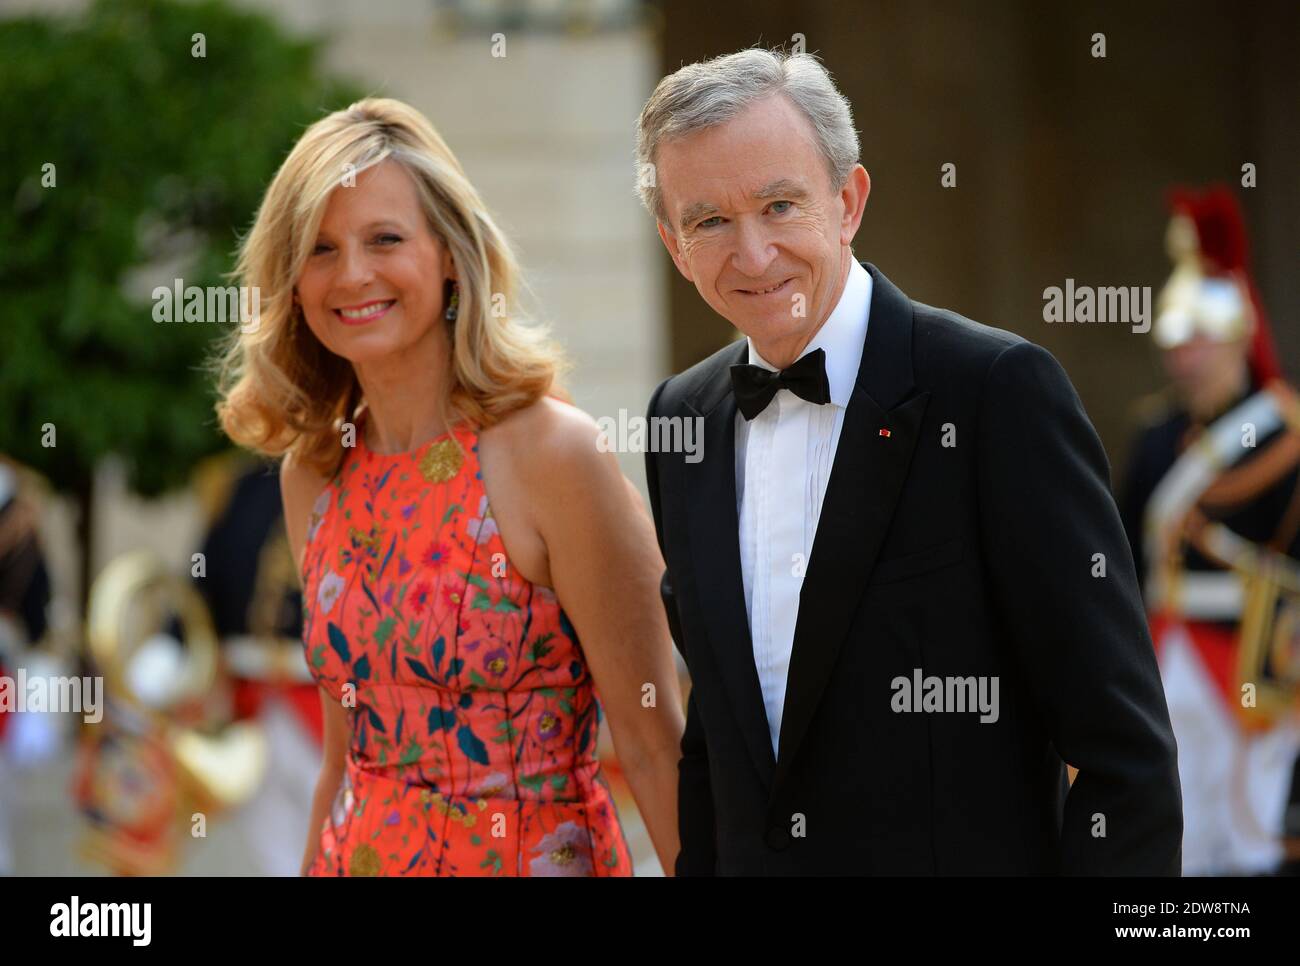 Bernard Arnault and Helene Arnault attend the State Banquet given in honour of HM The Queen Elizabeth II by French President Francois Hollande at the Elysee Palace, as part of the official ceremonies of the 70th Anniversary of the D Day, on June 6, 2014, in Paris, France. Photo by Christian Liewig/ABACAPRESS.COM Stock Photo